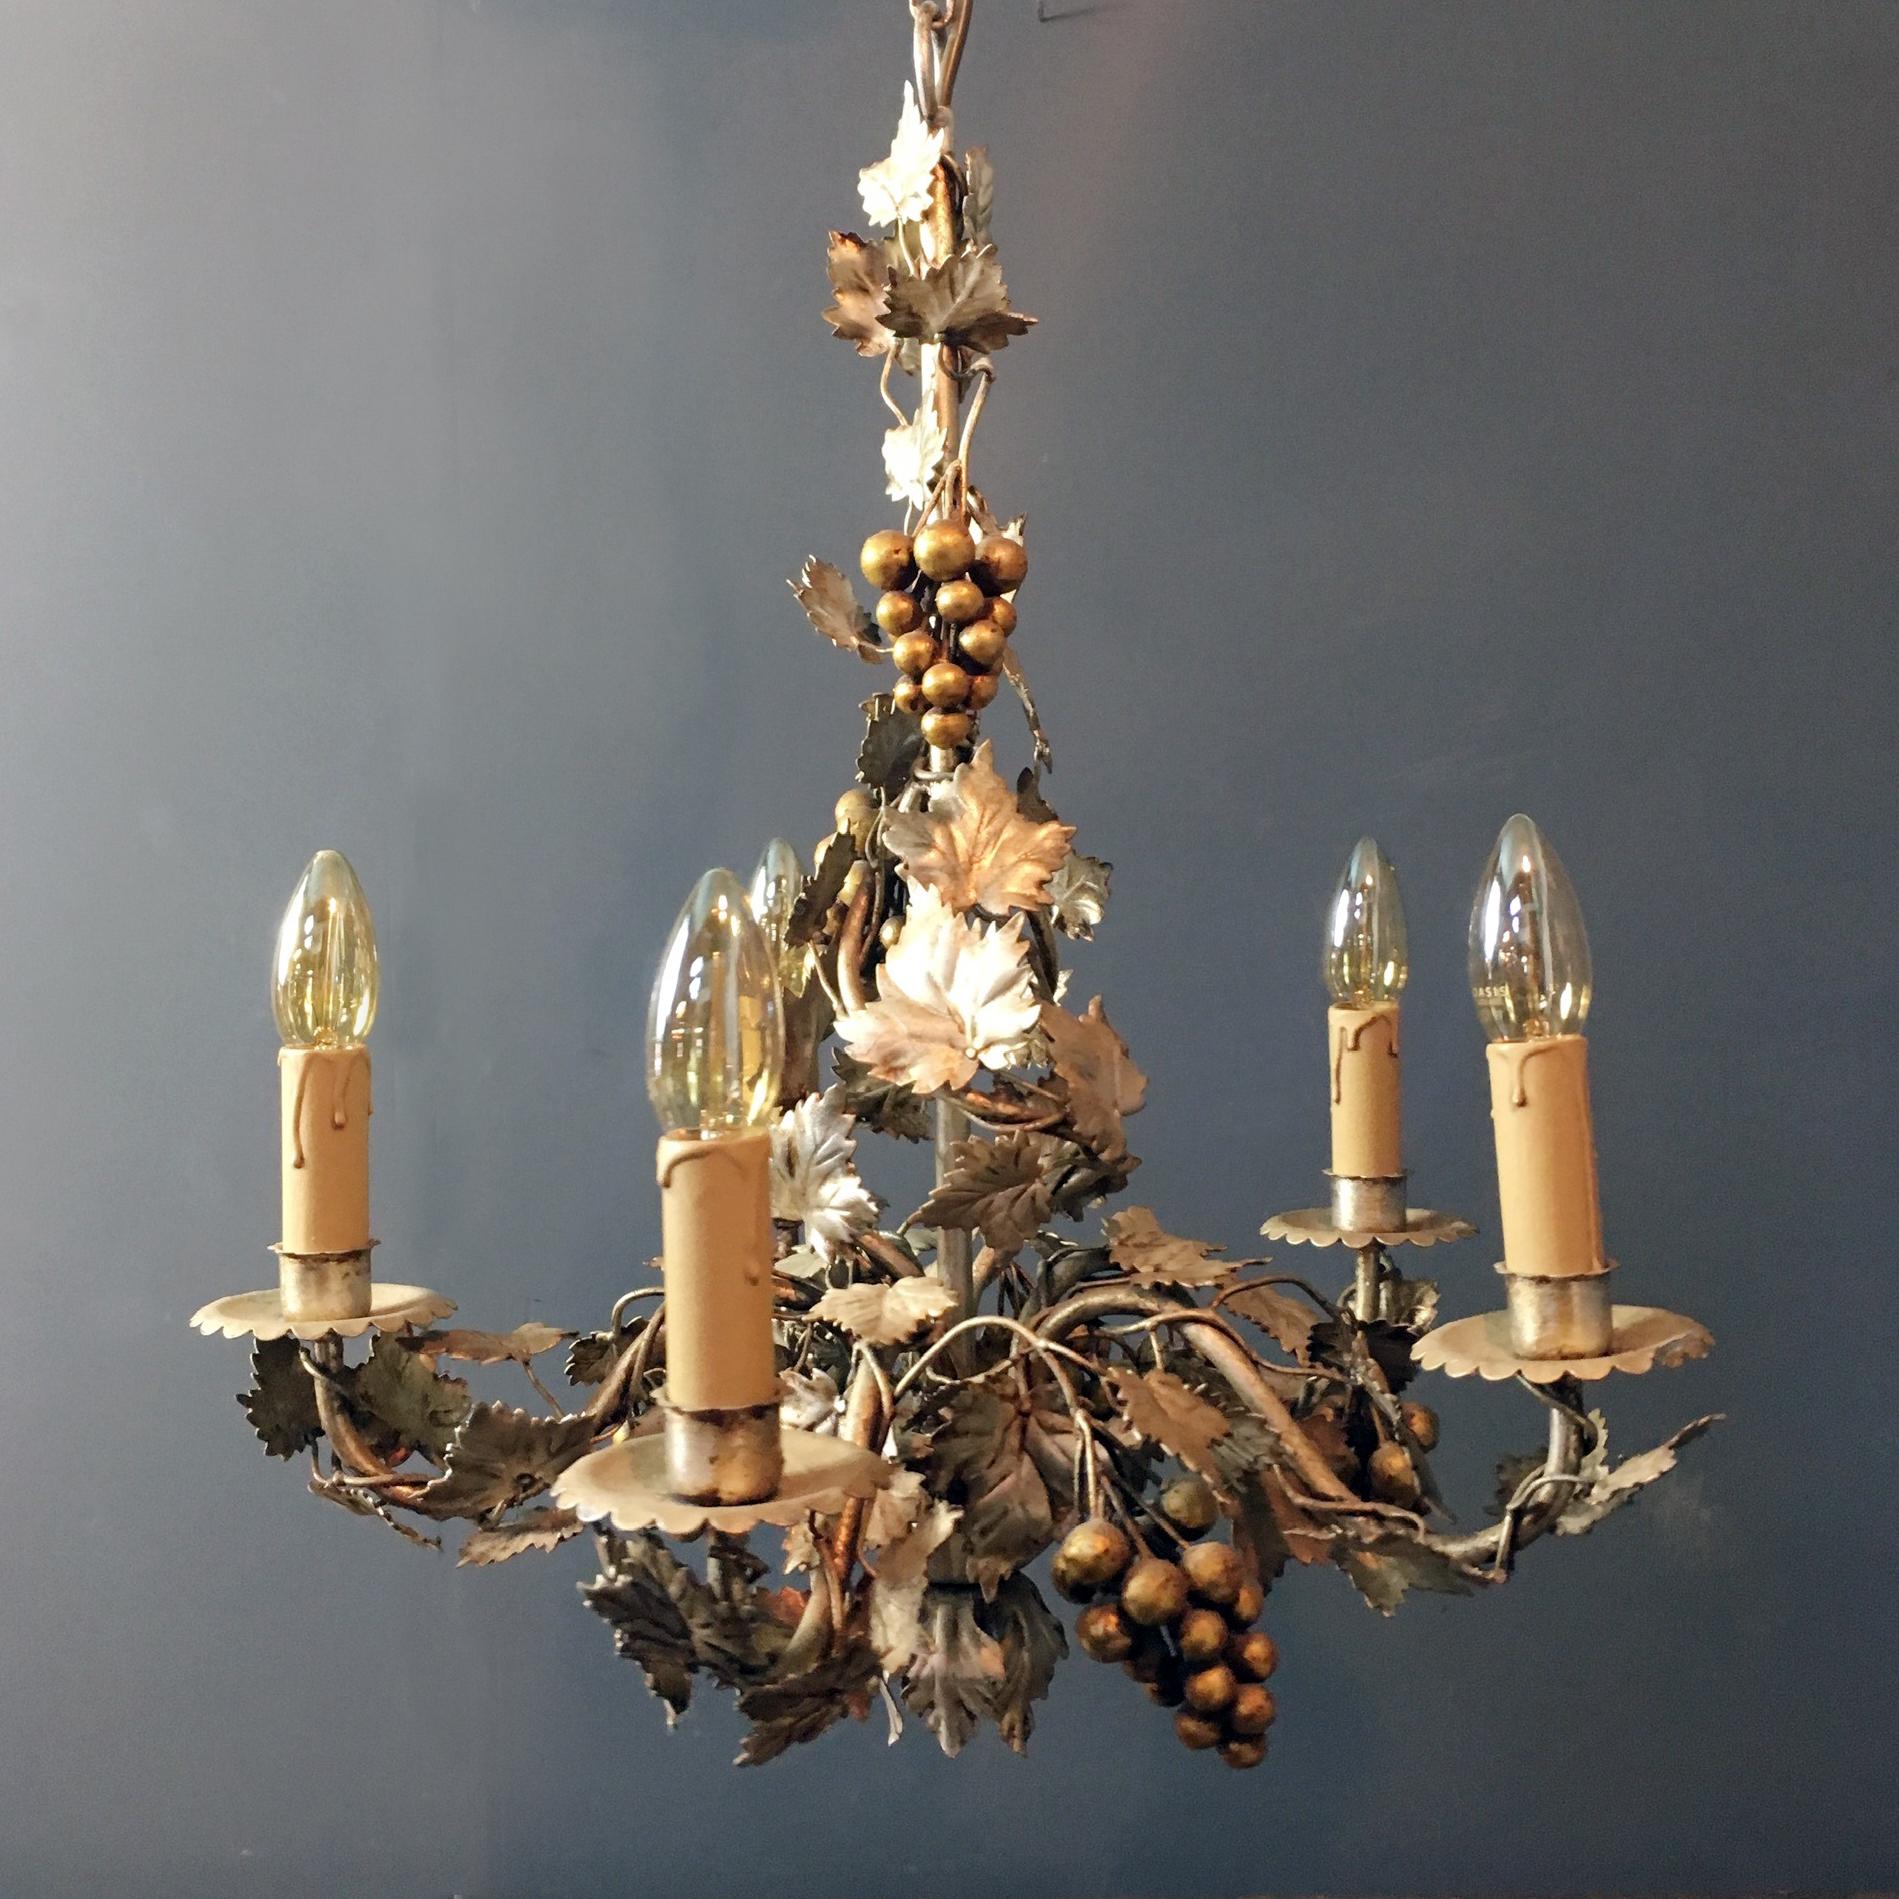 Hand-Crafted Vintage French Gilt Grape Tole Chandelier